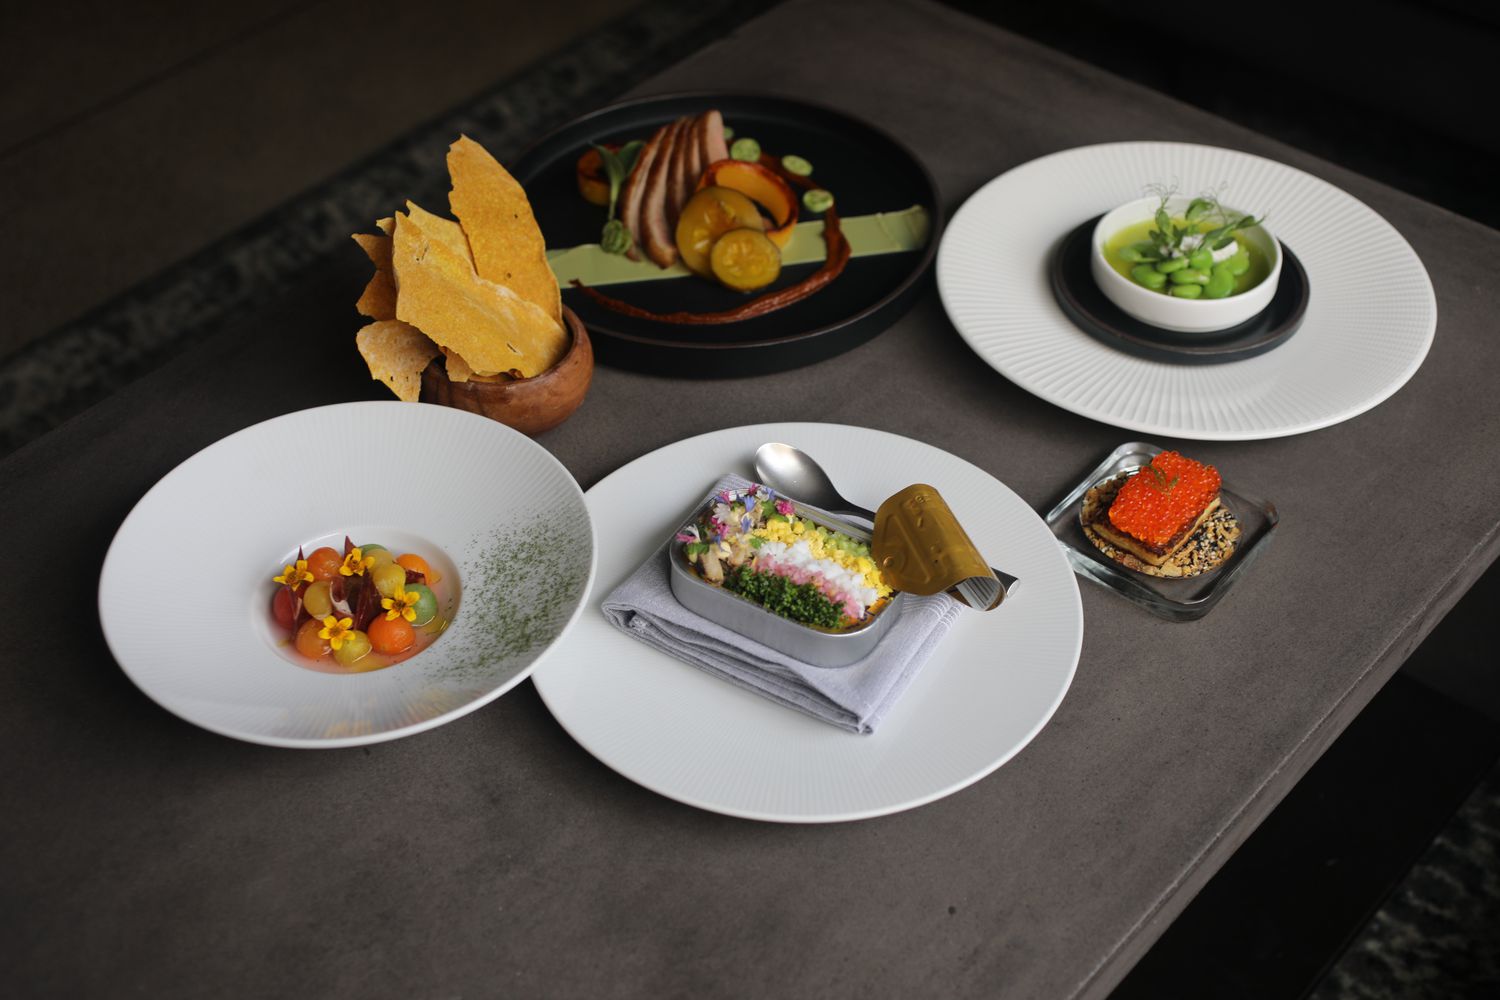 Full spres at Verita restaurant with lima beans in a bowl on one plate, a opened sardine tin with finely diced vegetables on a second plate, slice pork on a fourth, melon-balled fruit on a fourth, a small sqaure plate with caviar and crackers and a bowl with chips